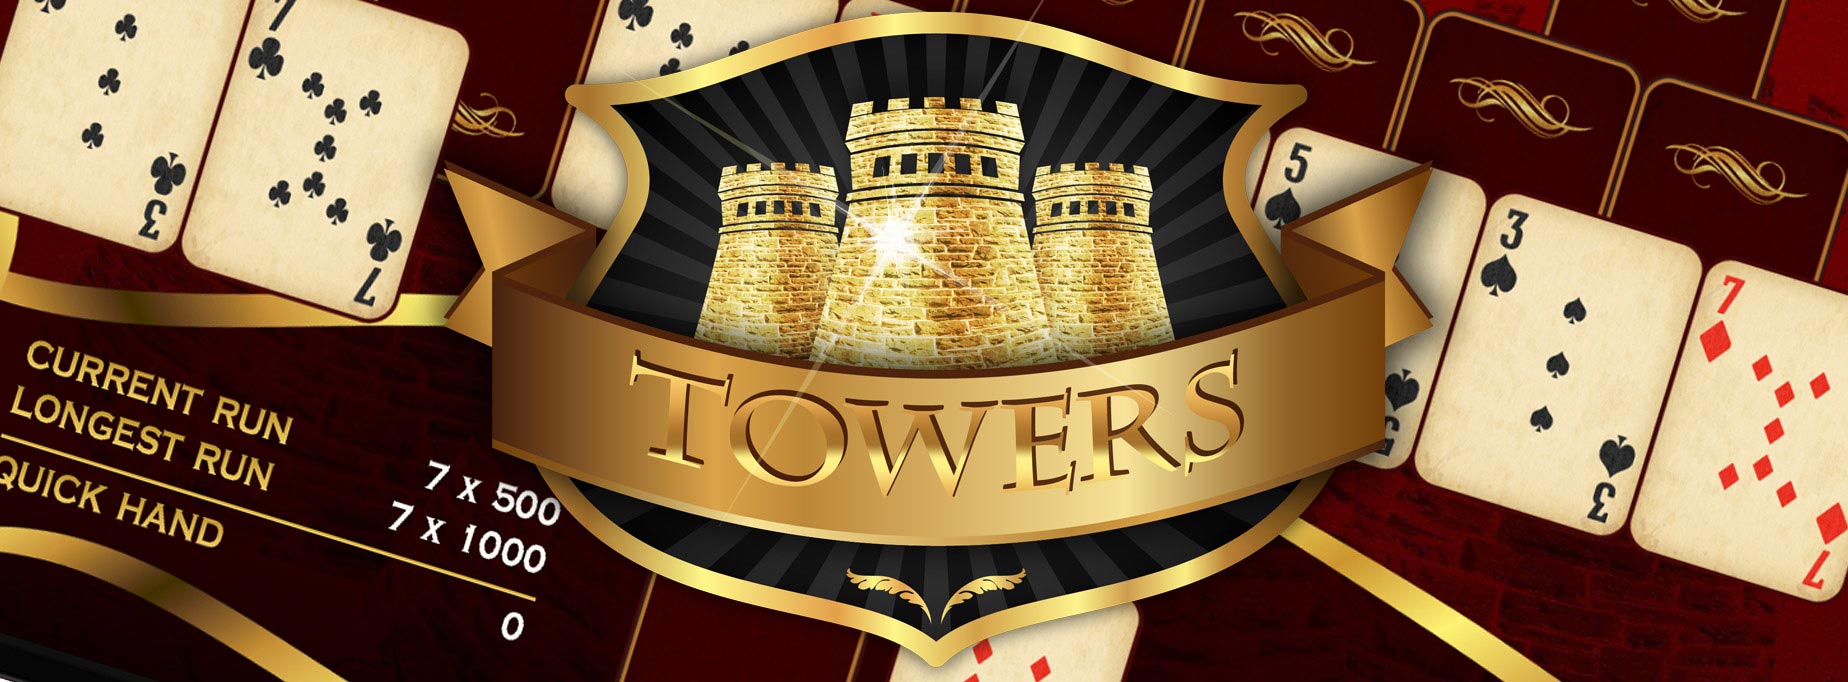 towers tripeaks pyramid solitaire game